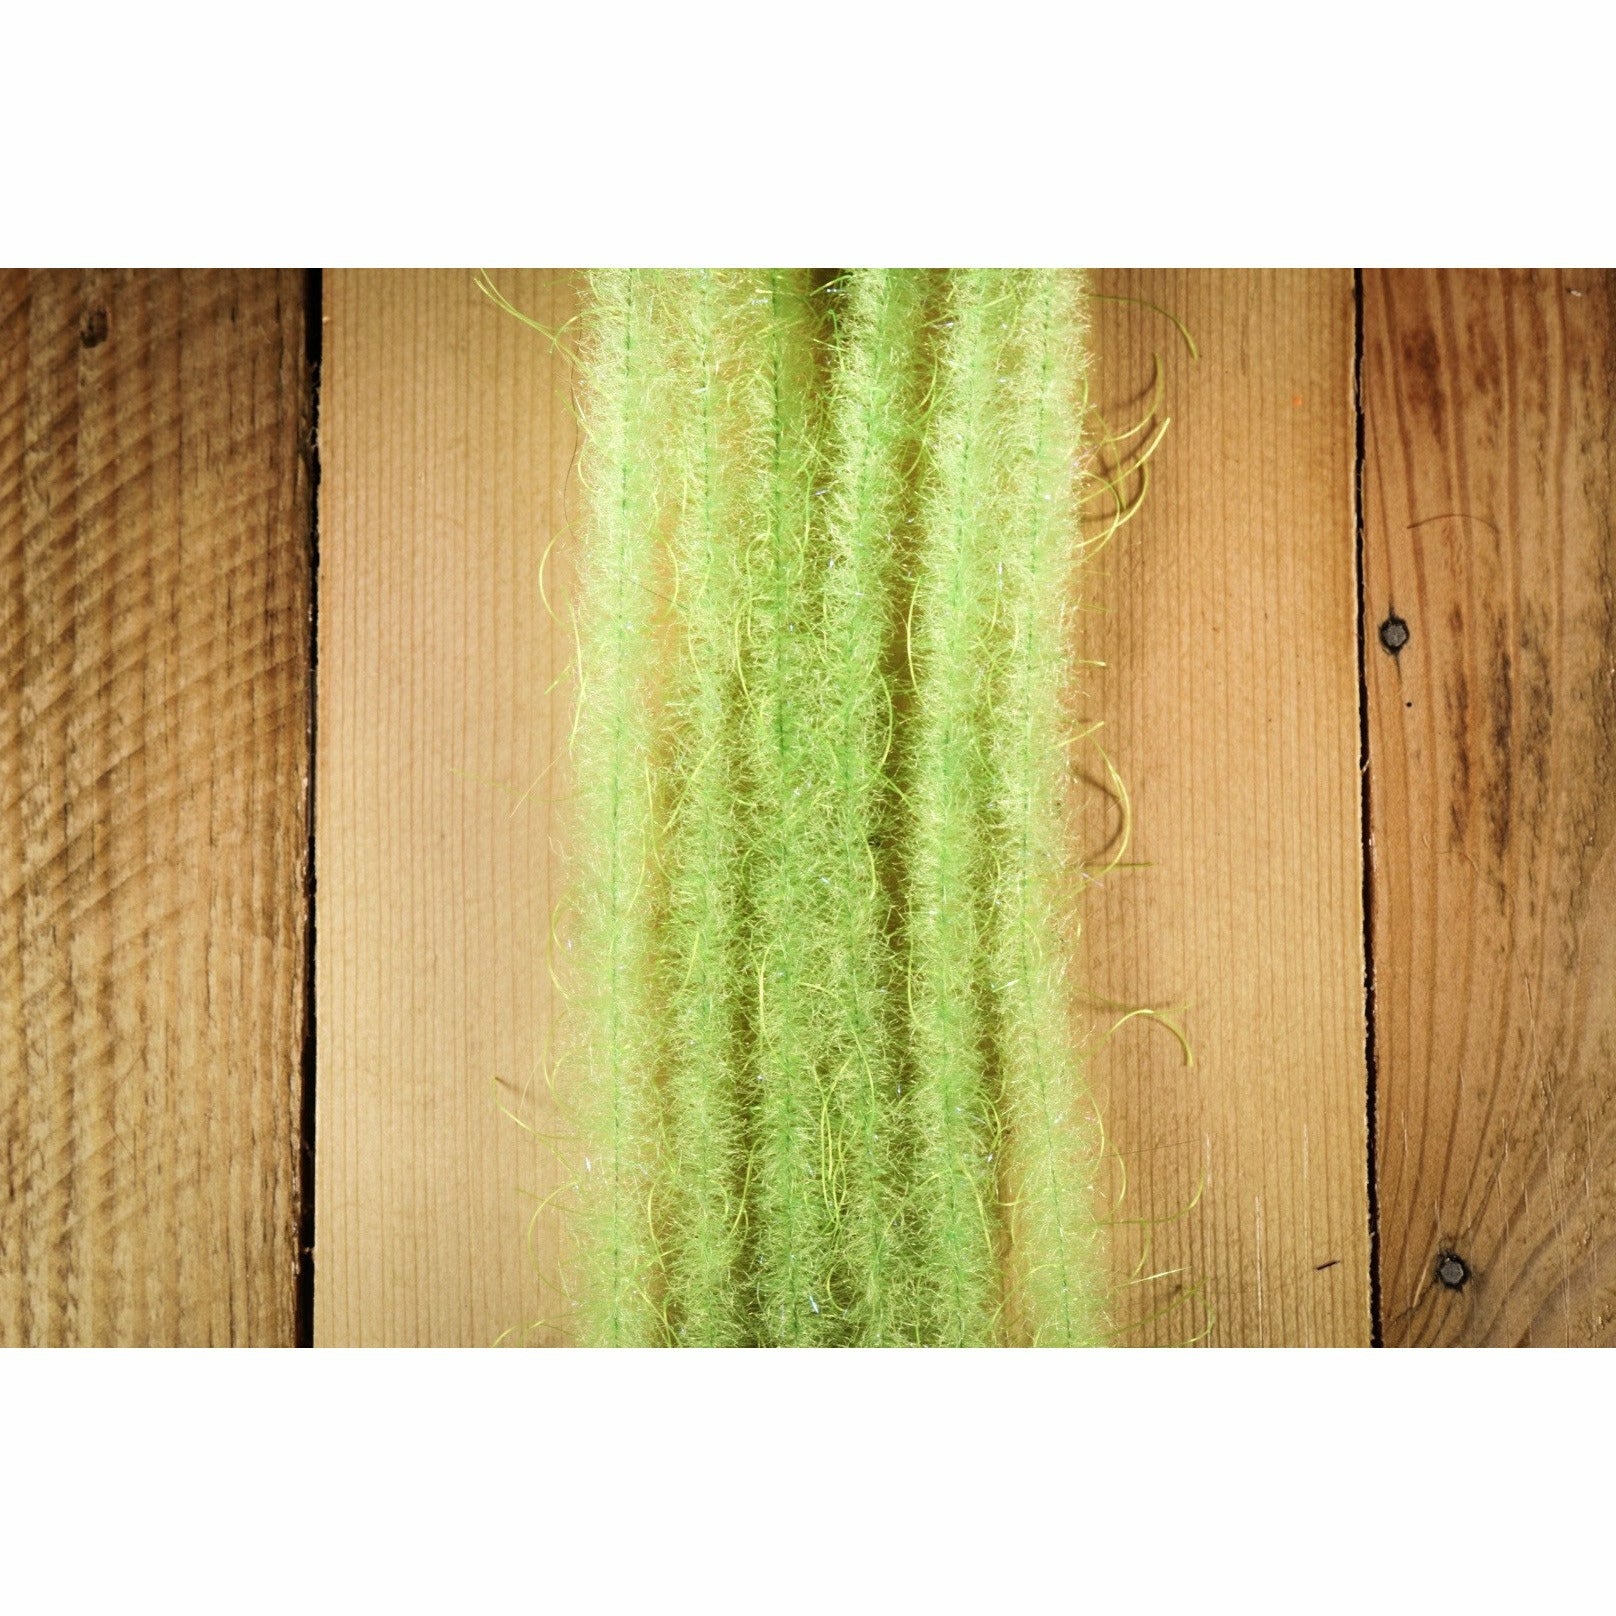 EP Wooly Critter Brush .5" - Chartreuse